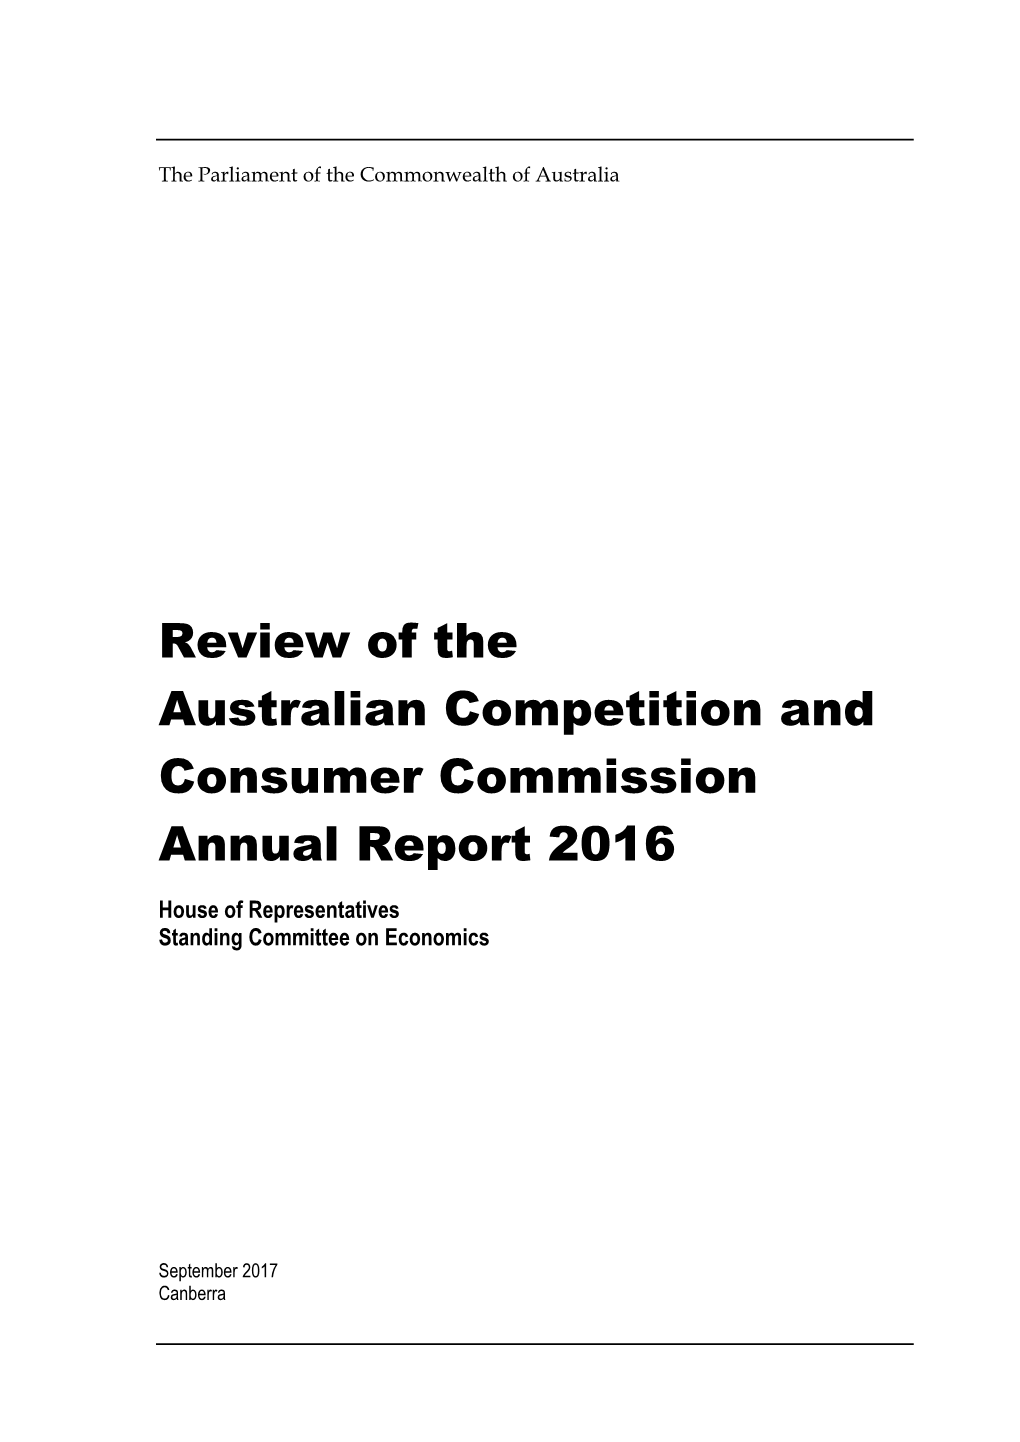 Review of the Australian Competition and Consumer Commission Annual Report 2016 House of Representatives Standing Committee on Economics